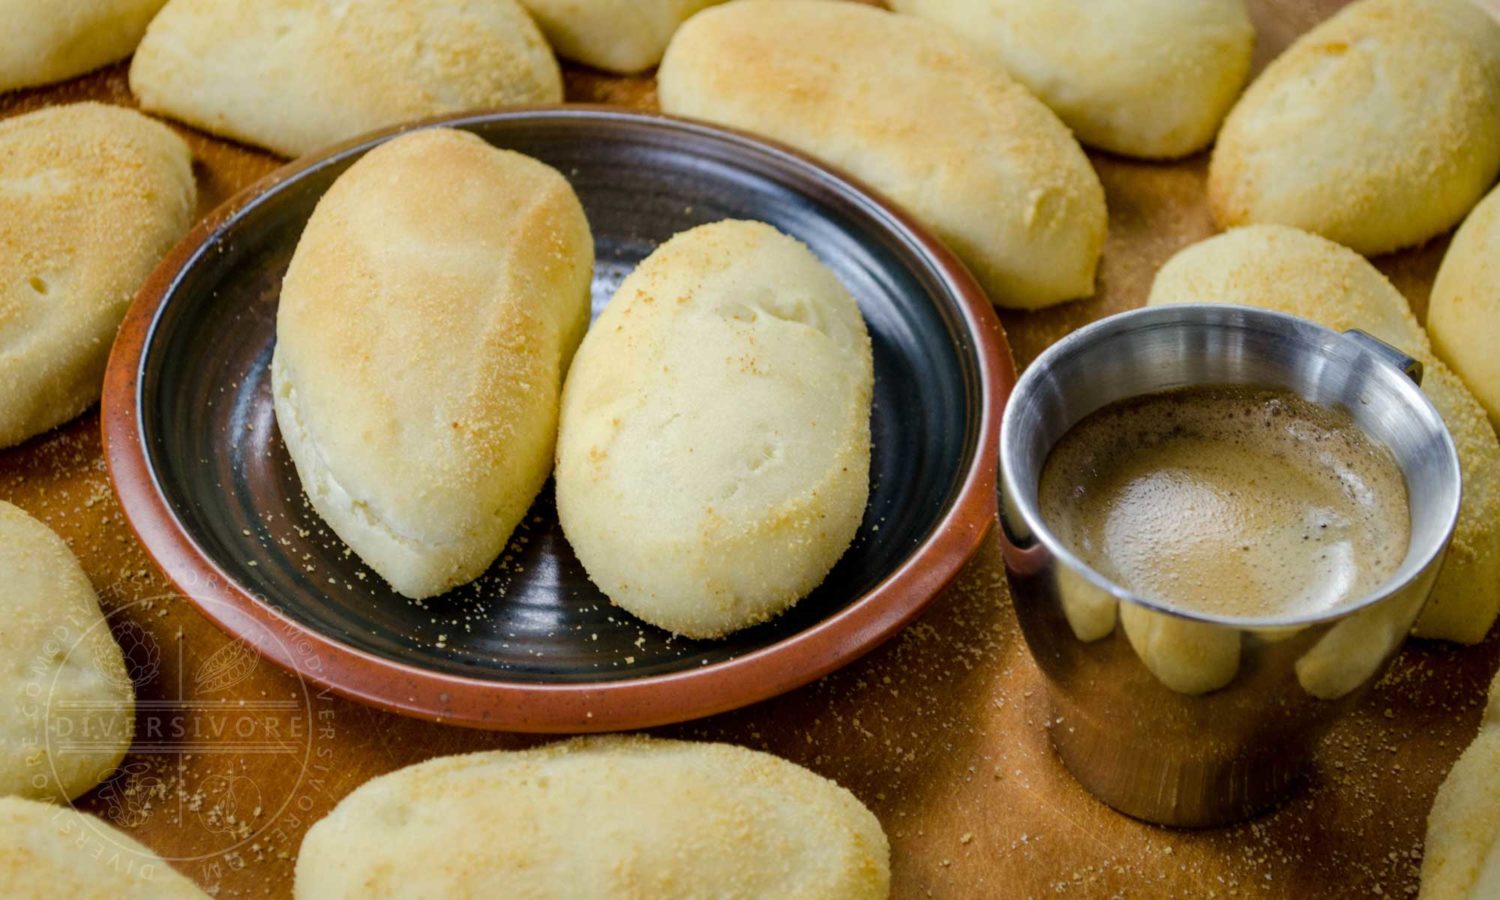 Pandesal (Filipino rolls) with a small cup of espresso